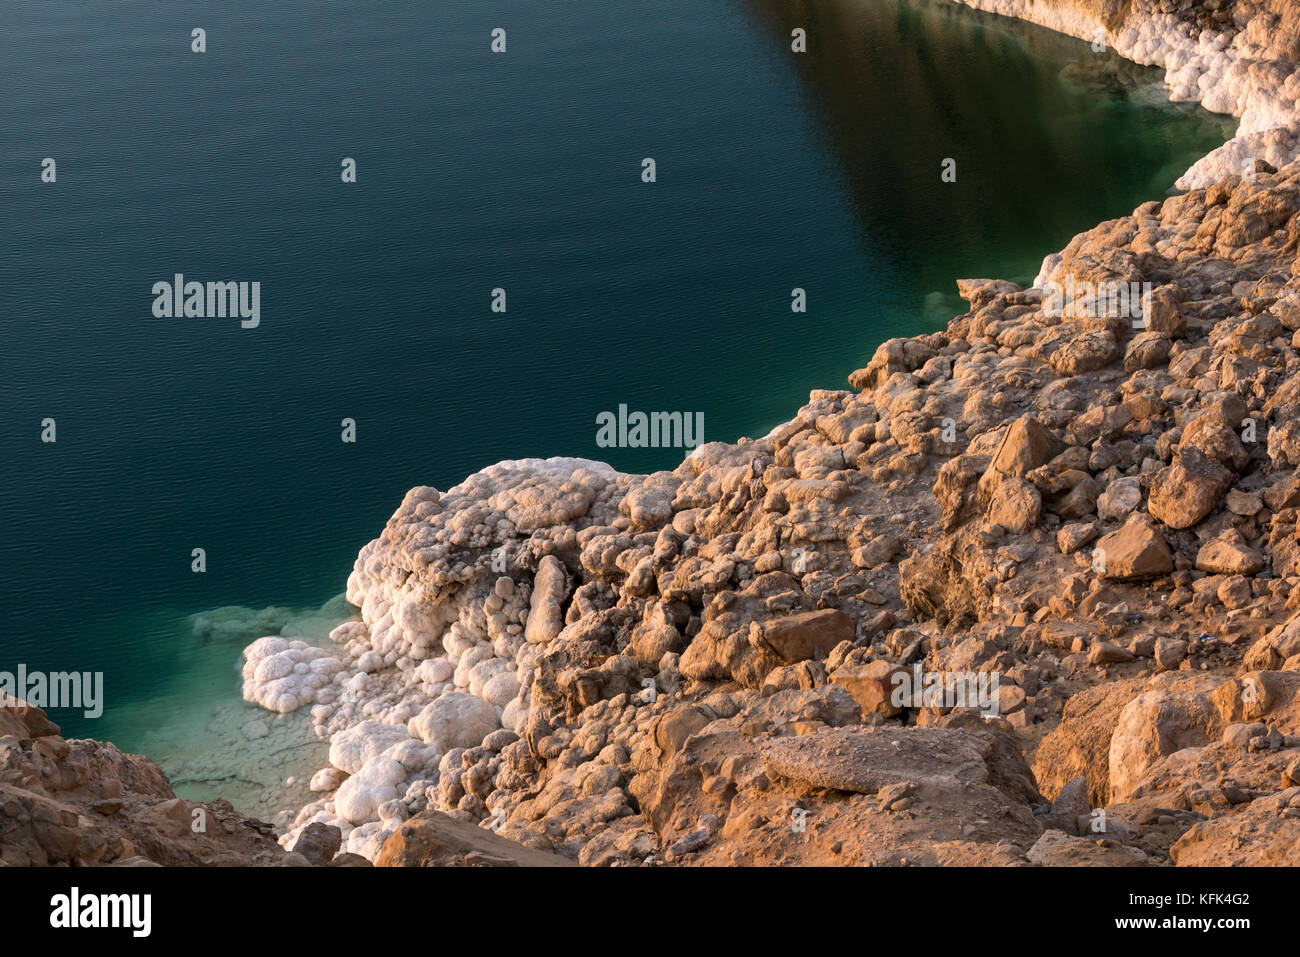 Dead Sea salt formations, called halite ooids, on shore edge, Jordan, Middle East, lit by low sun at dusk Stock Photo